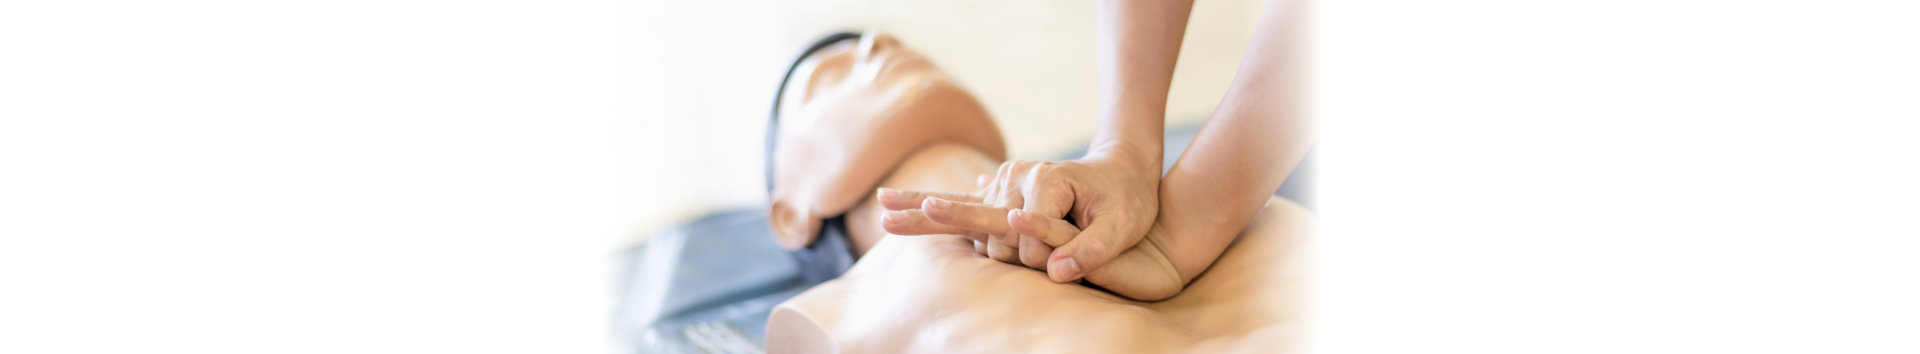 cpr being performed on a dummy